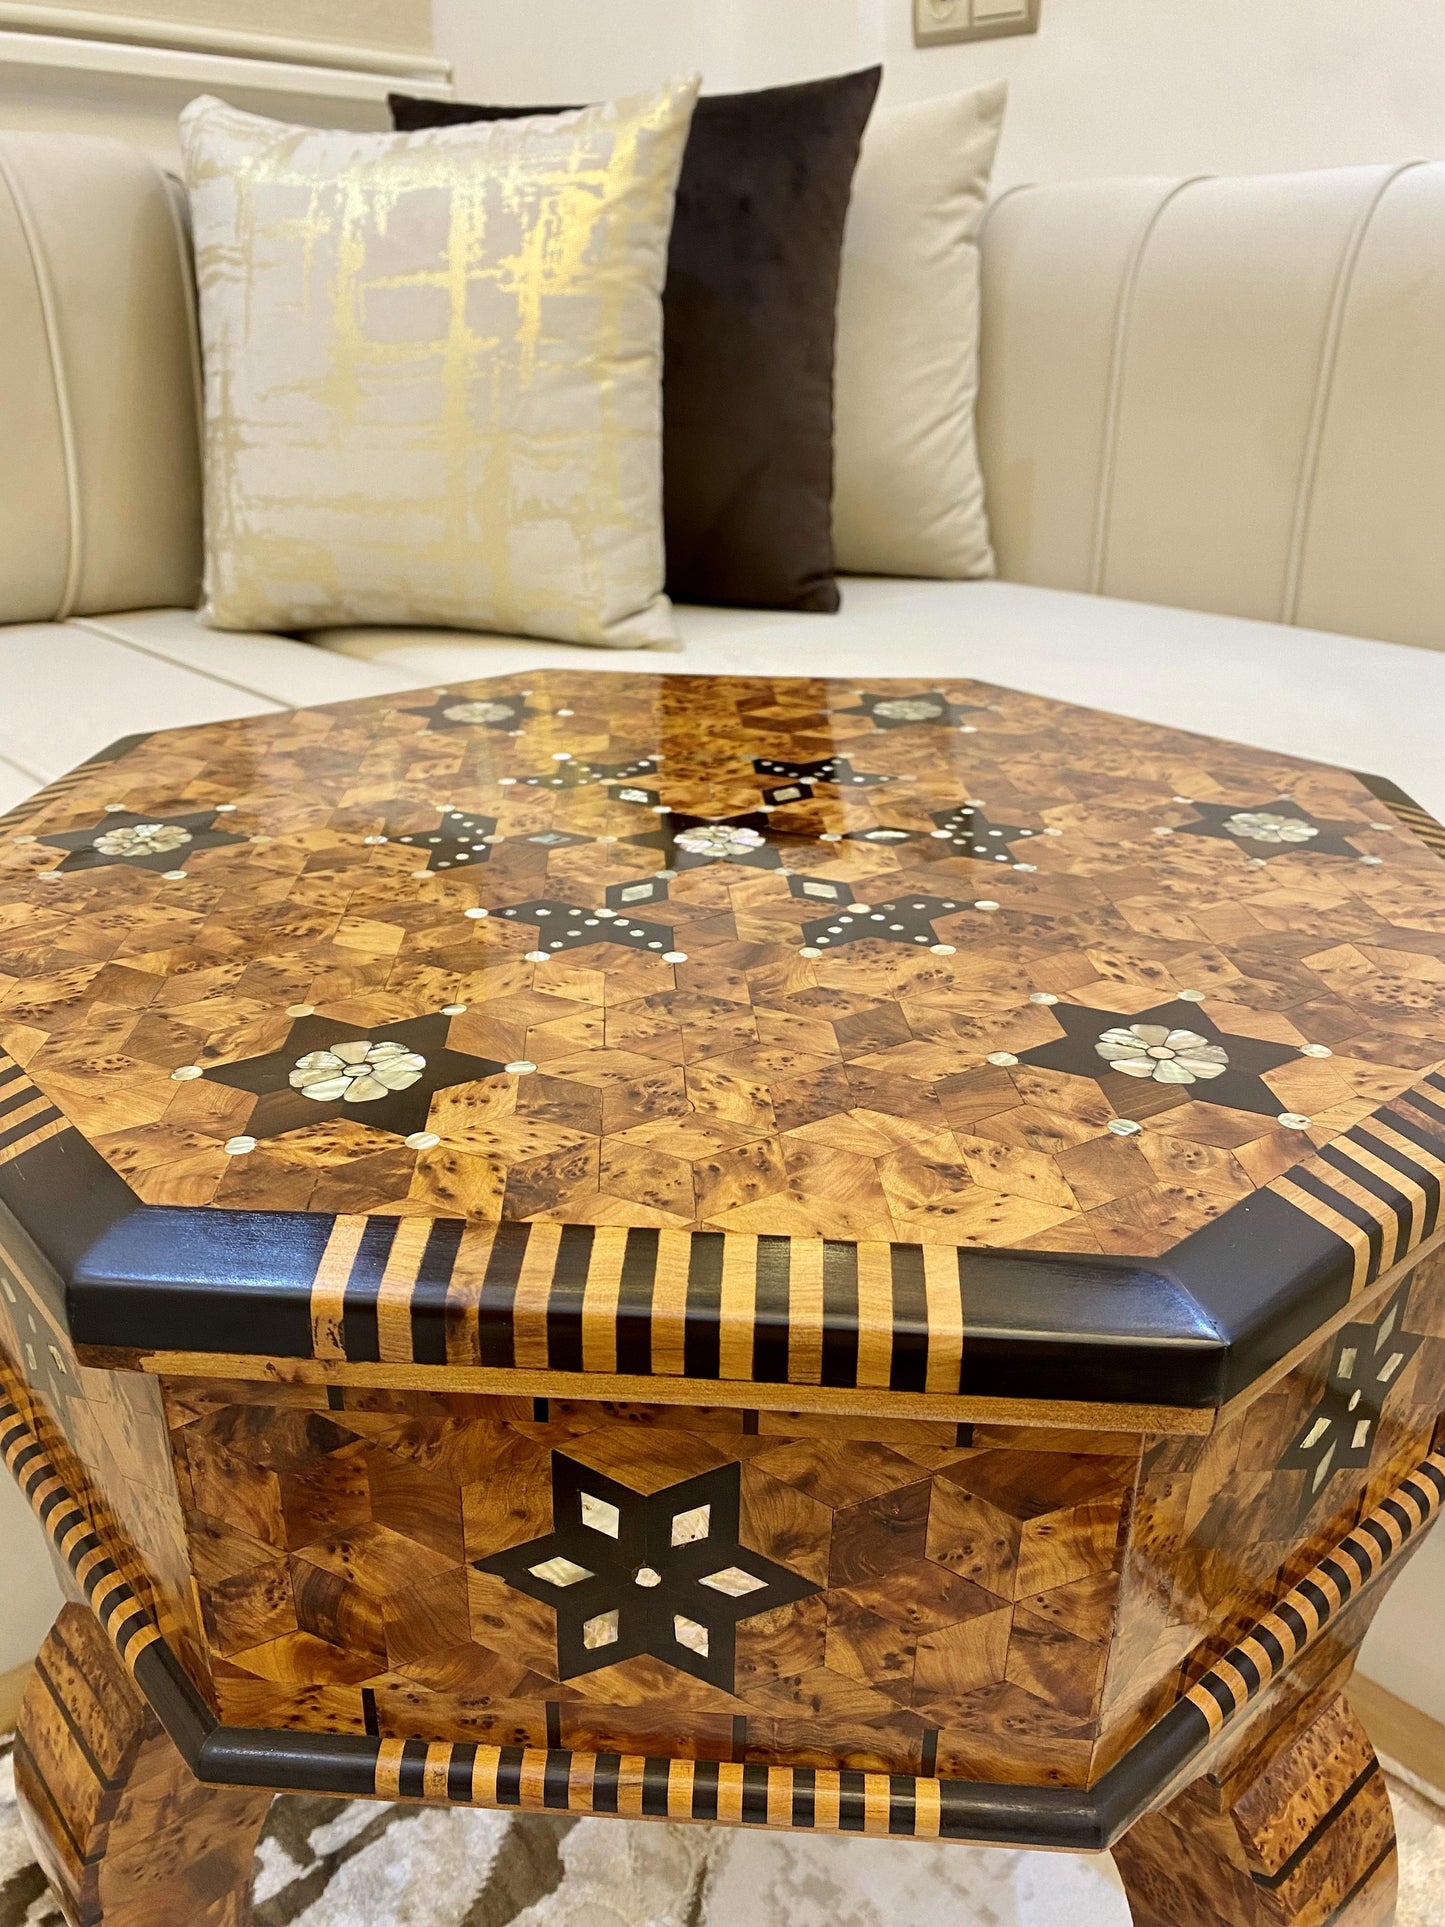 Large Wood Coffee Table home decor